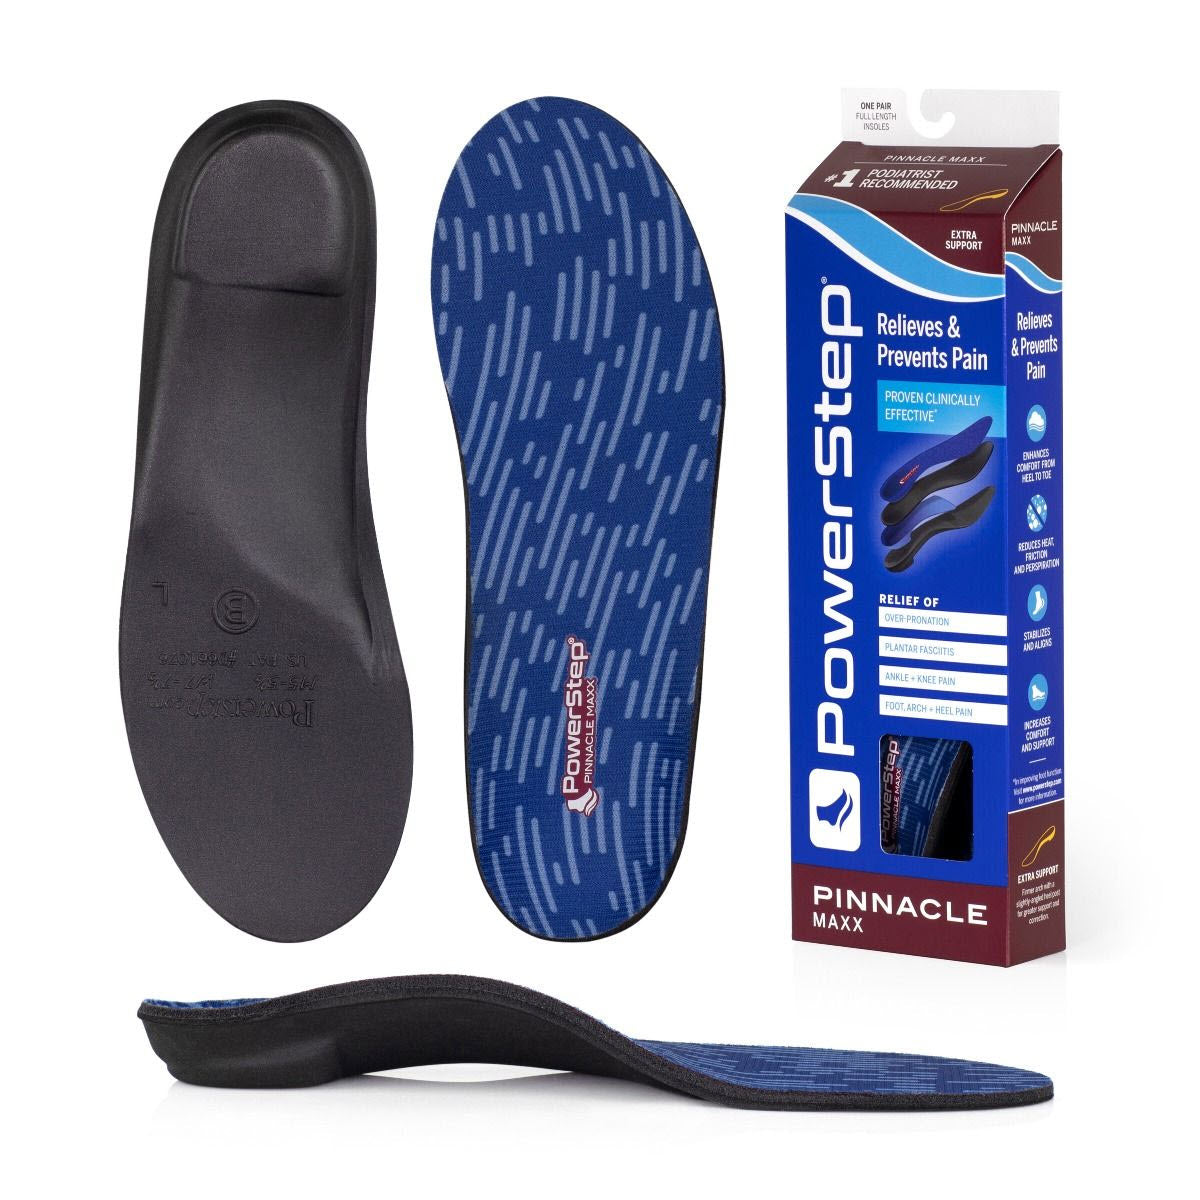 PINNACLE MAXX SUPPORT REPLACEMENT INSOLE